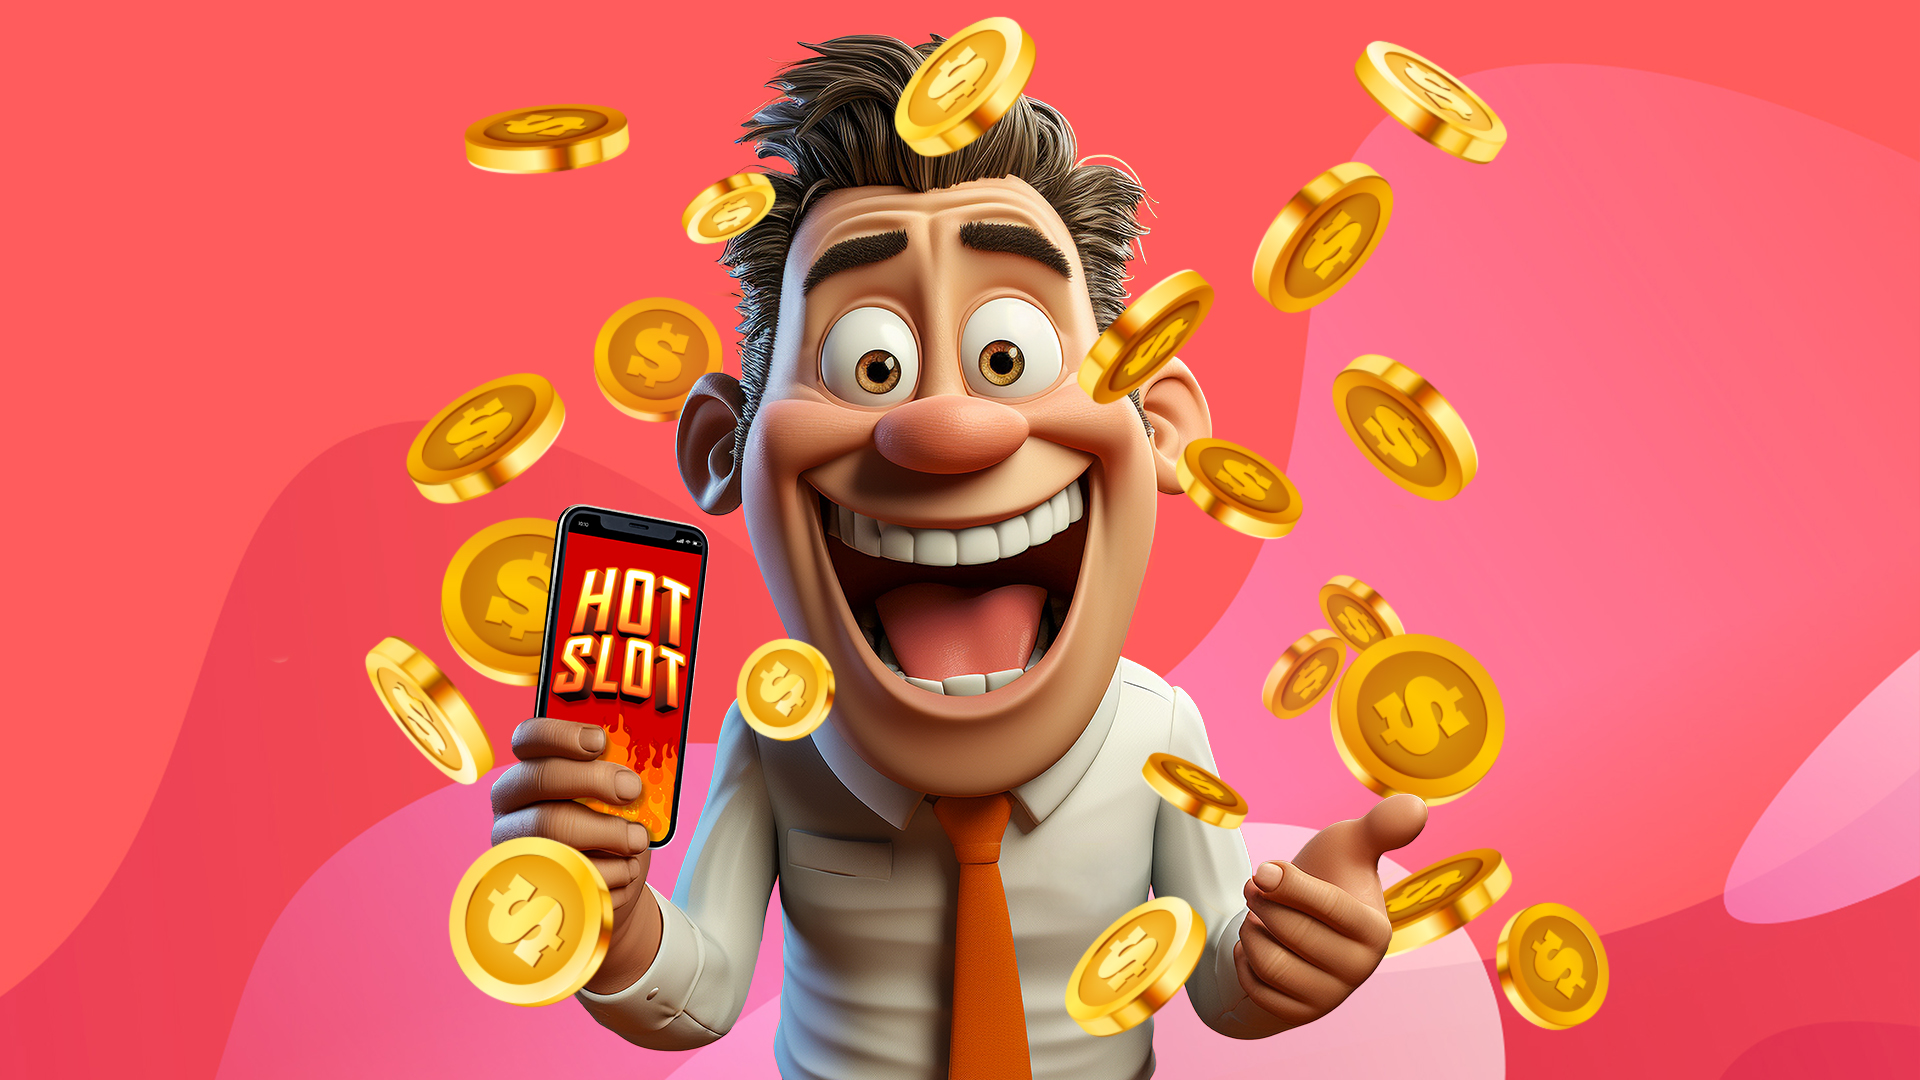 A cartoon man holding a mobile phone playing hot online slots, while being showered with gold coins against a pink background.